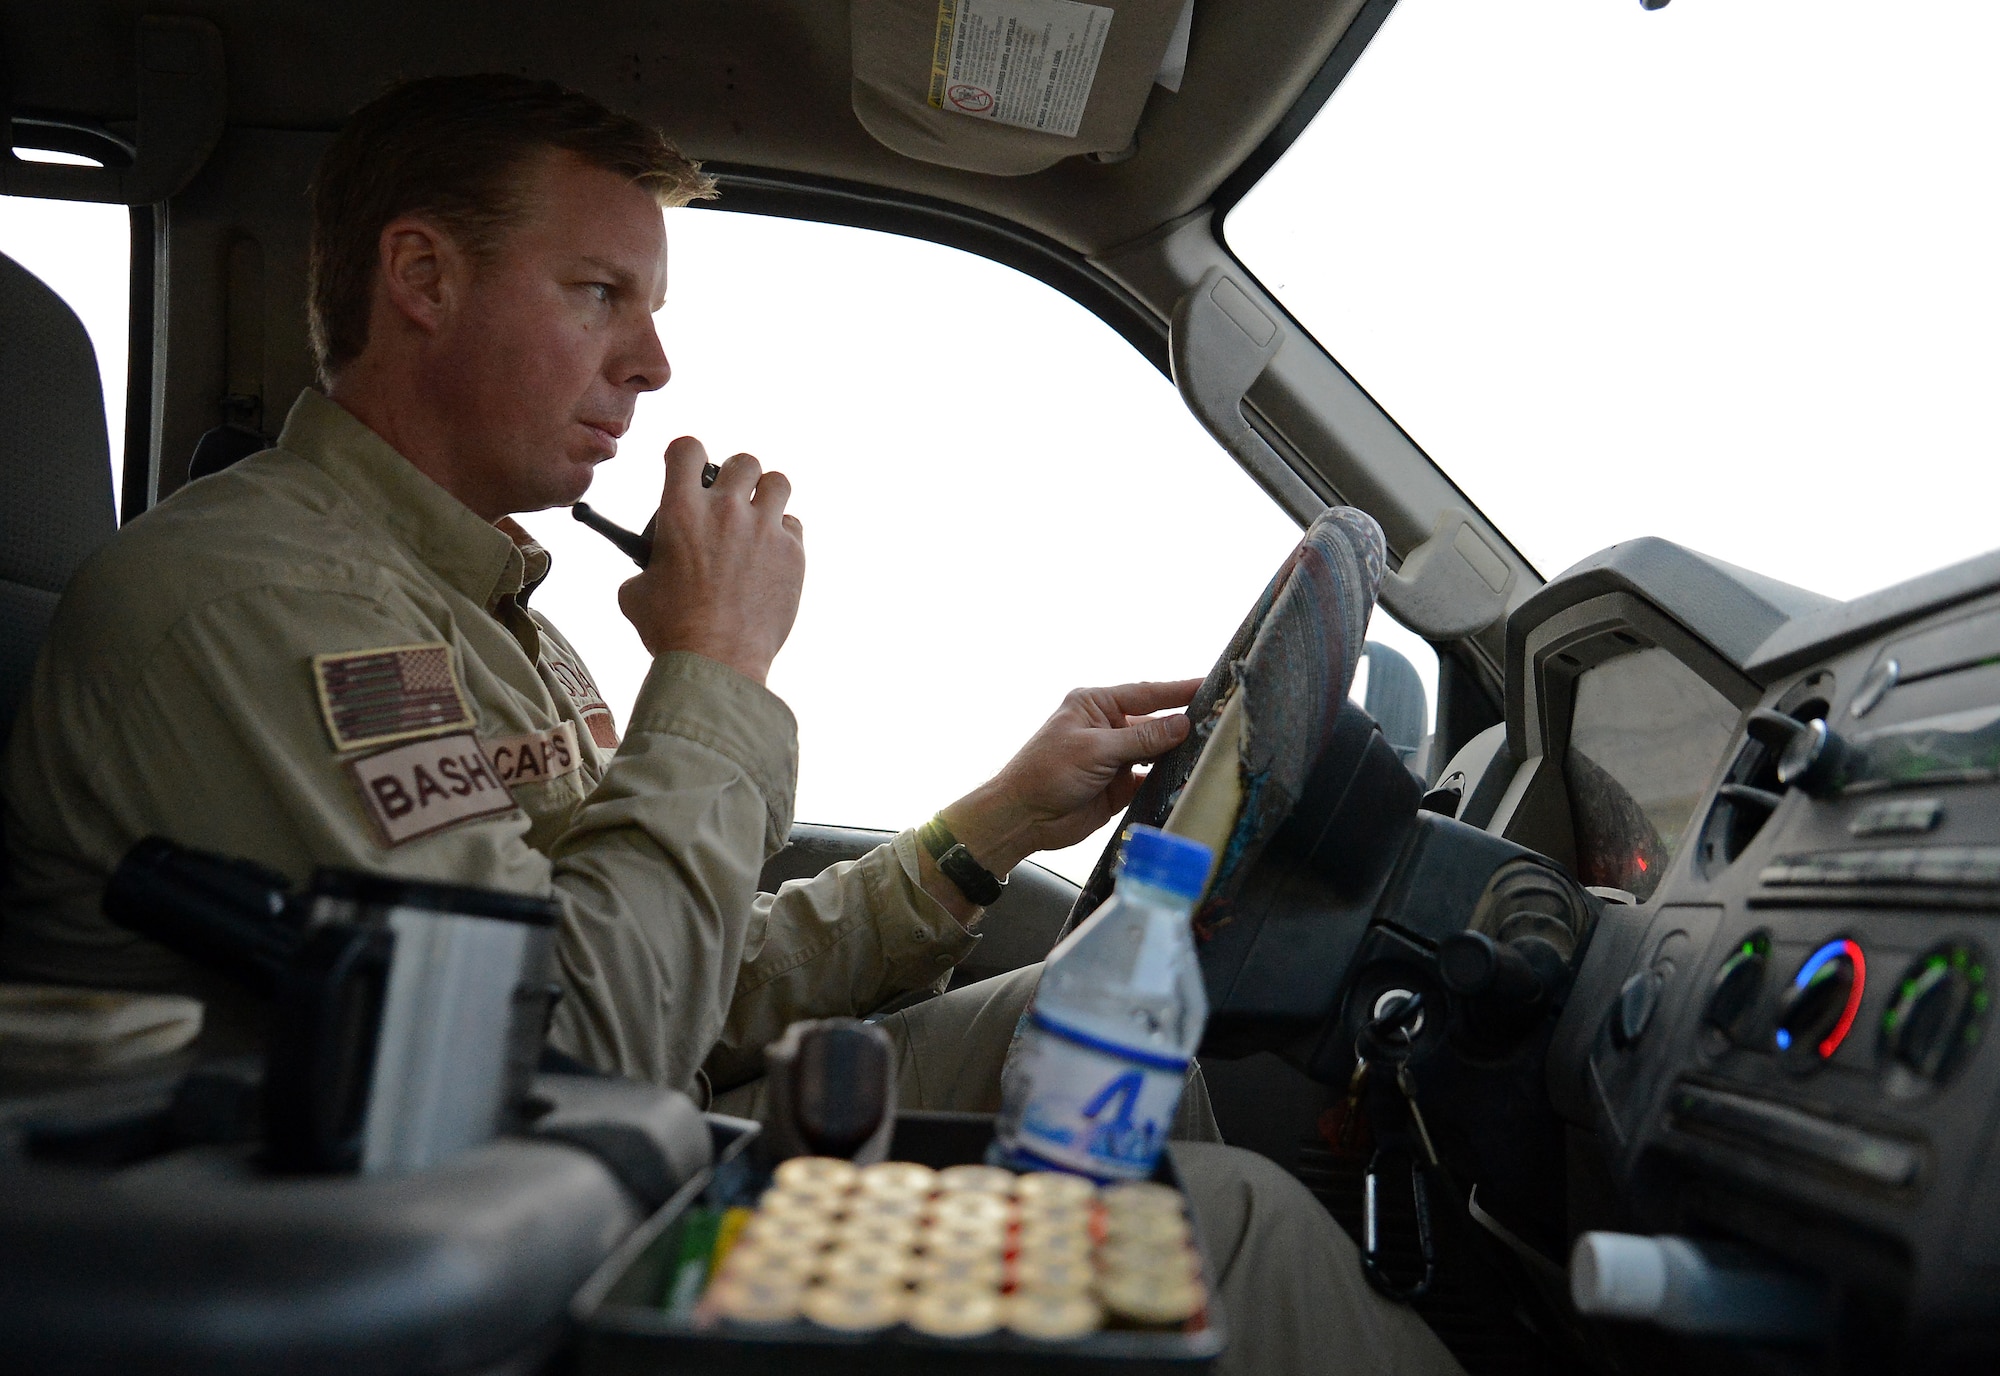 James Capps, 455th Air Expeditionary Wing U.S. Department of Agriculture (APHIS) and BASH forward operating base biologist, radios in to the air traffic control tower before crossing the runway Nov. 21, 2017 at Bagram Airfield, Afghanistan.